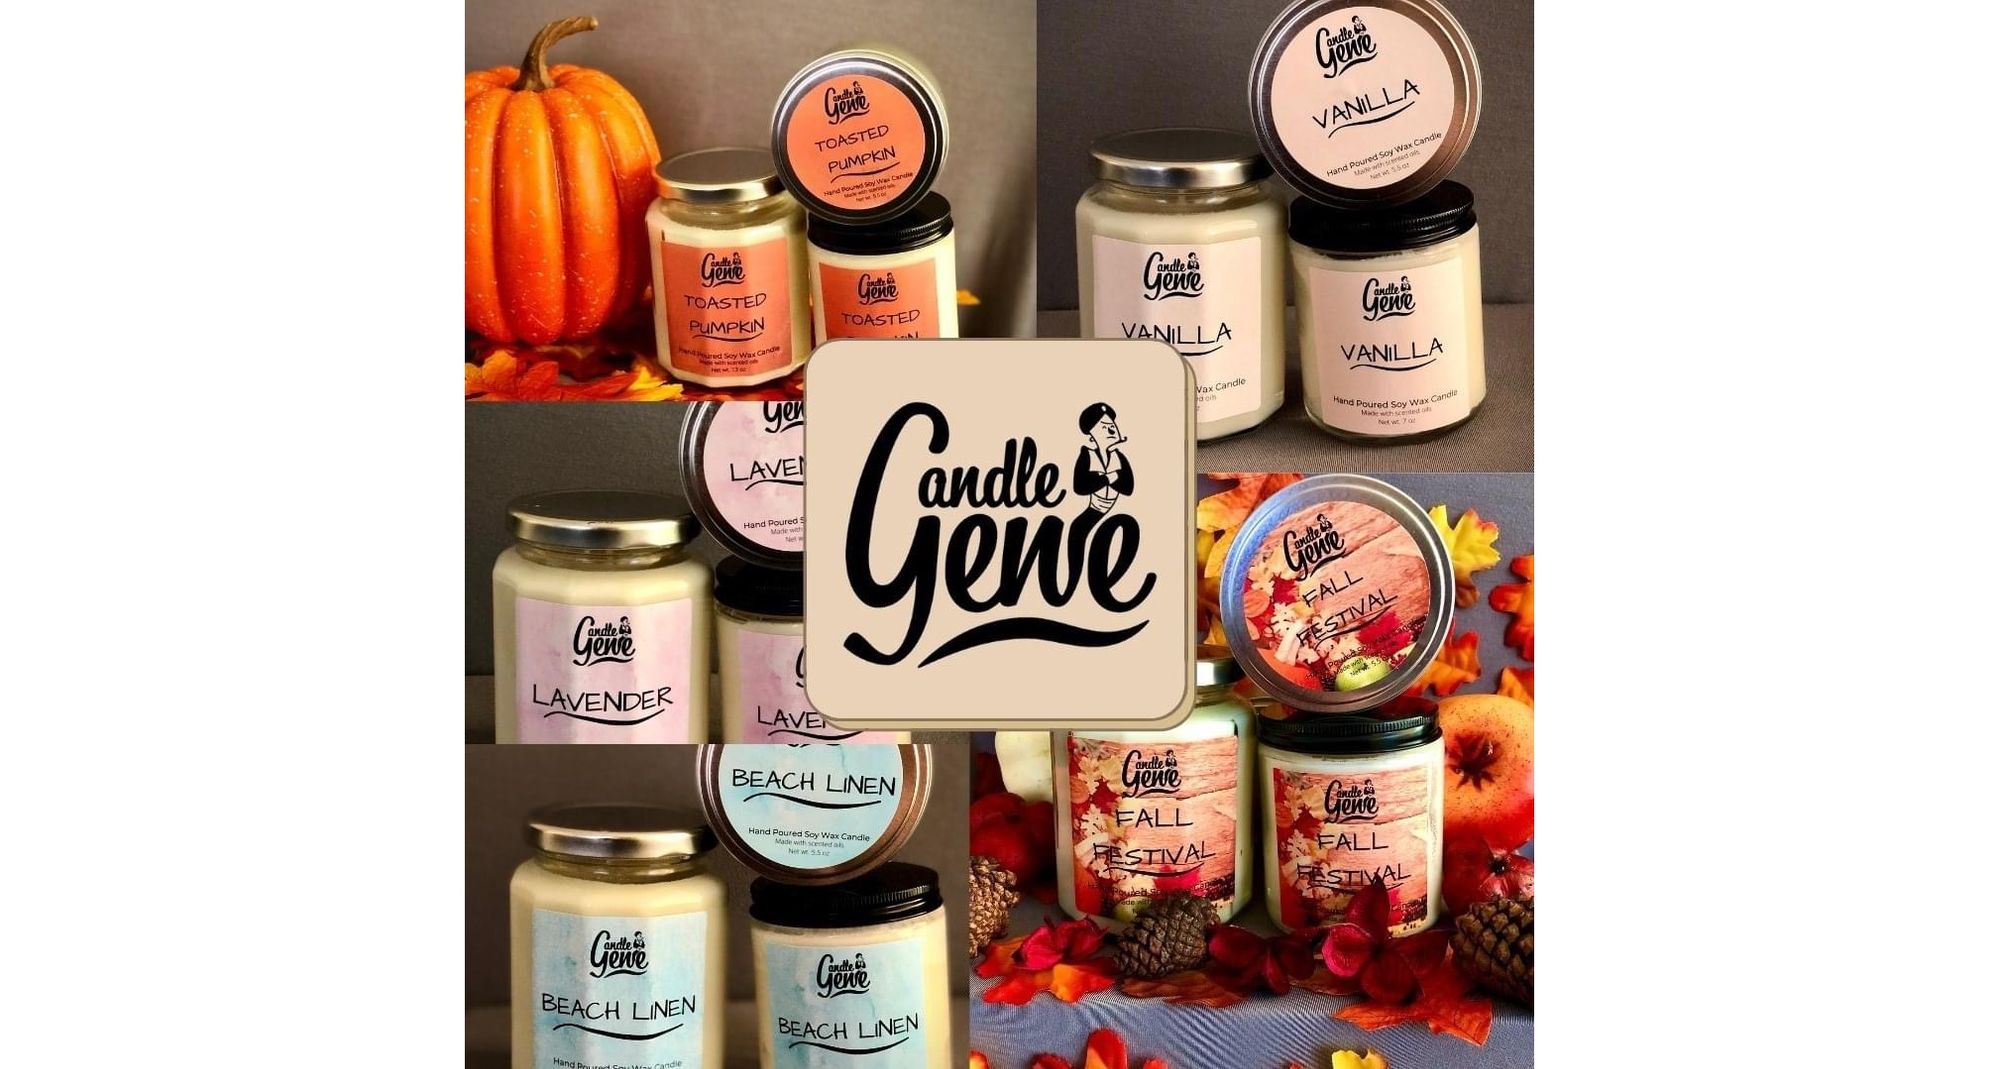 Inviting Scents That Everyone Will Love - Candle Genie